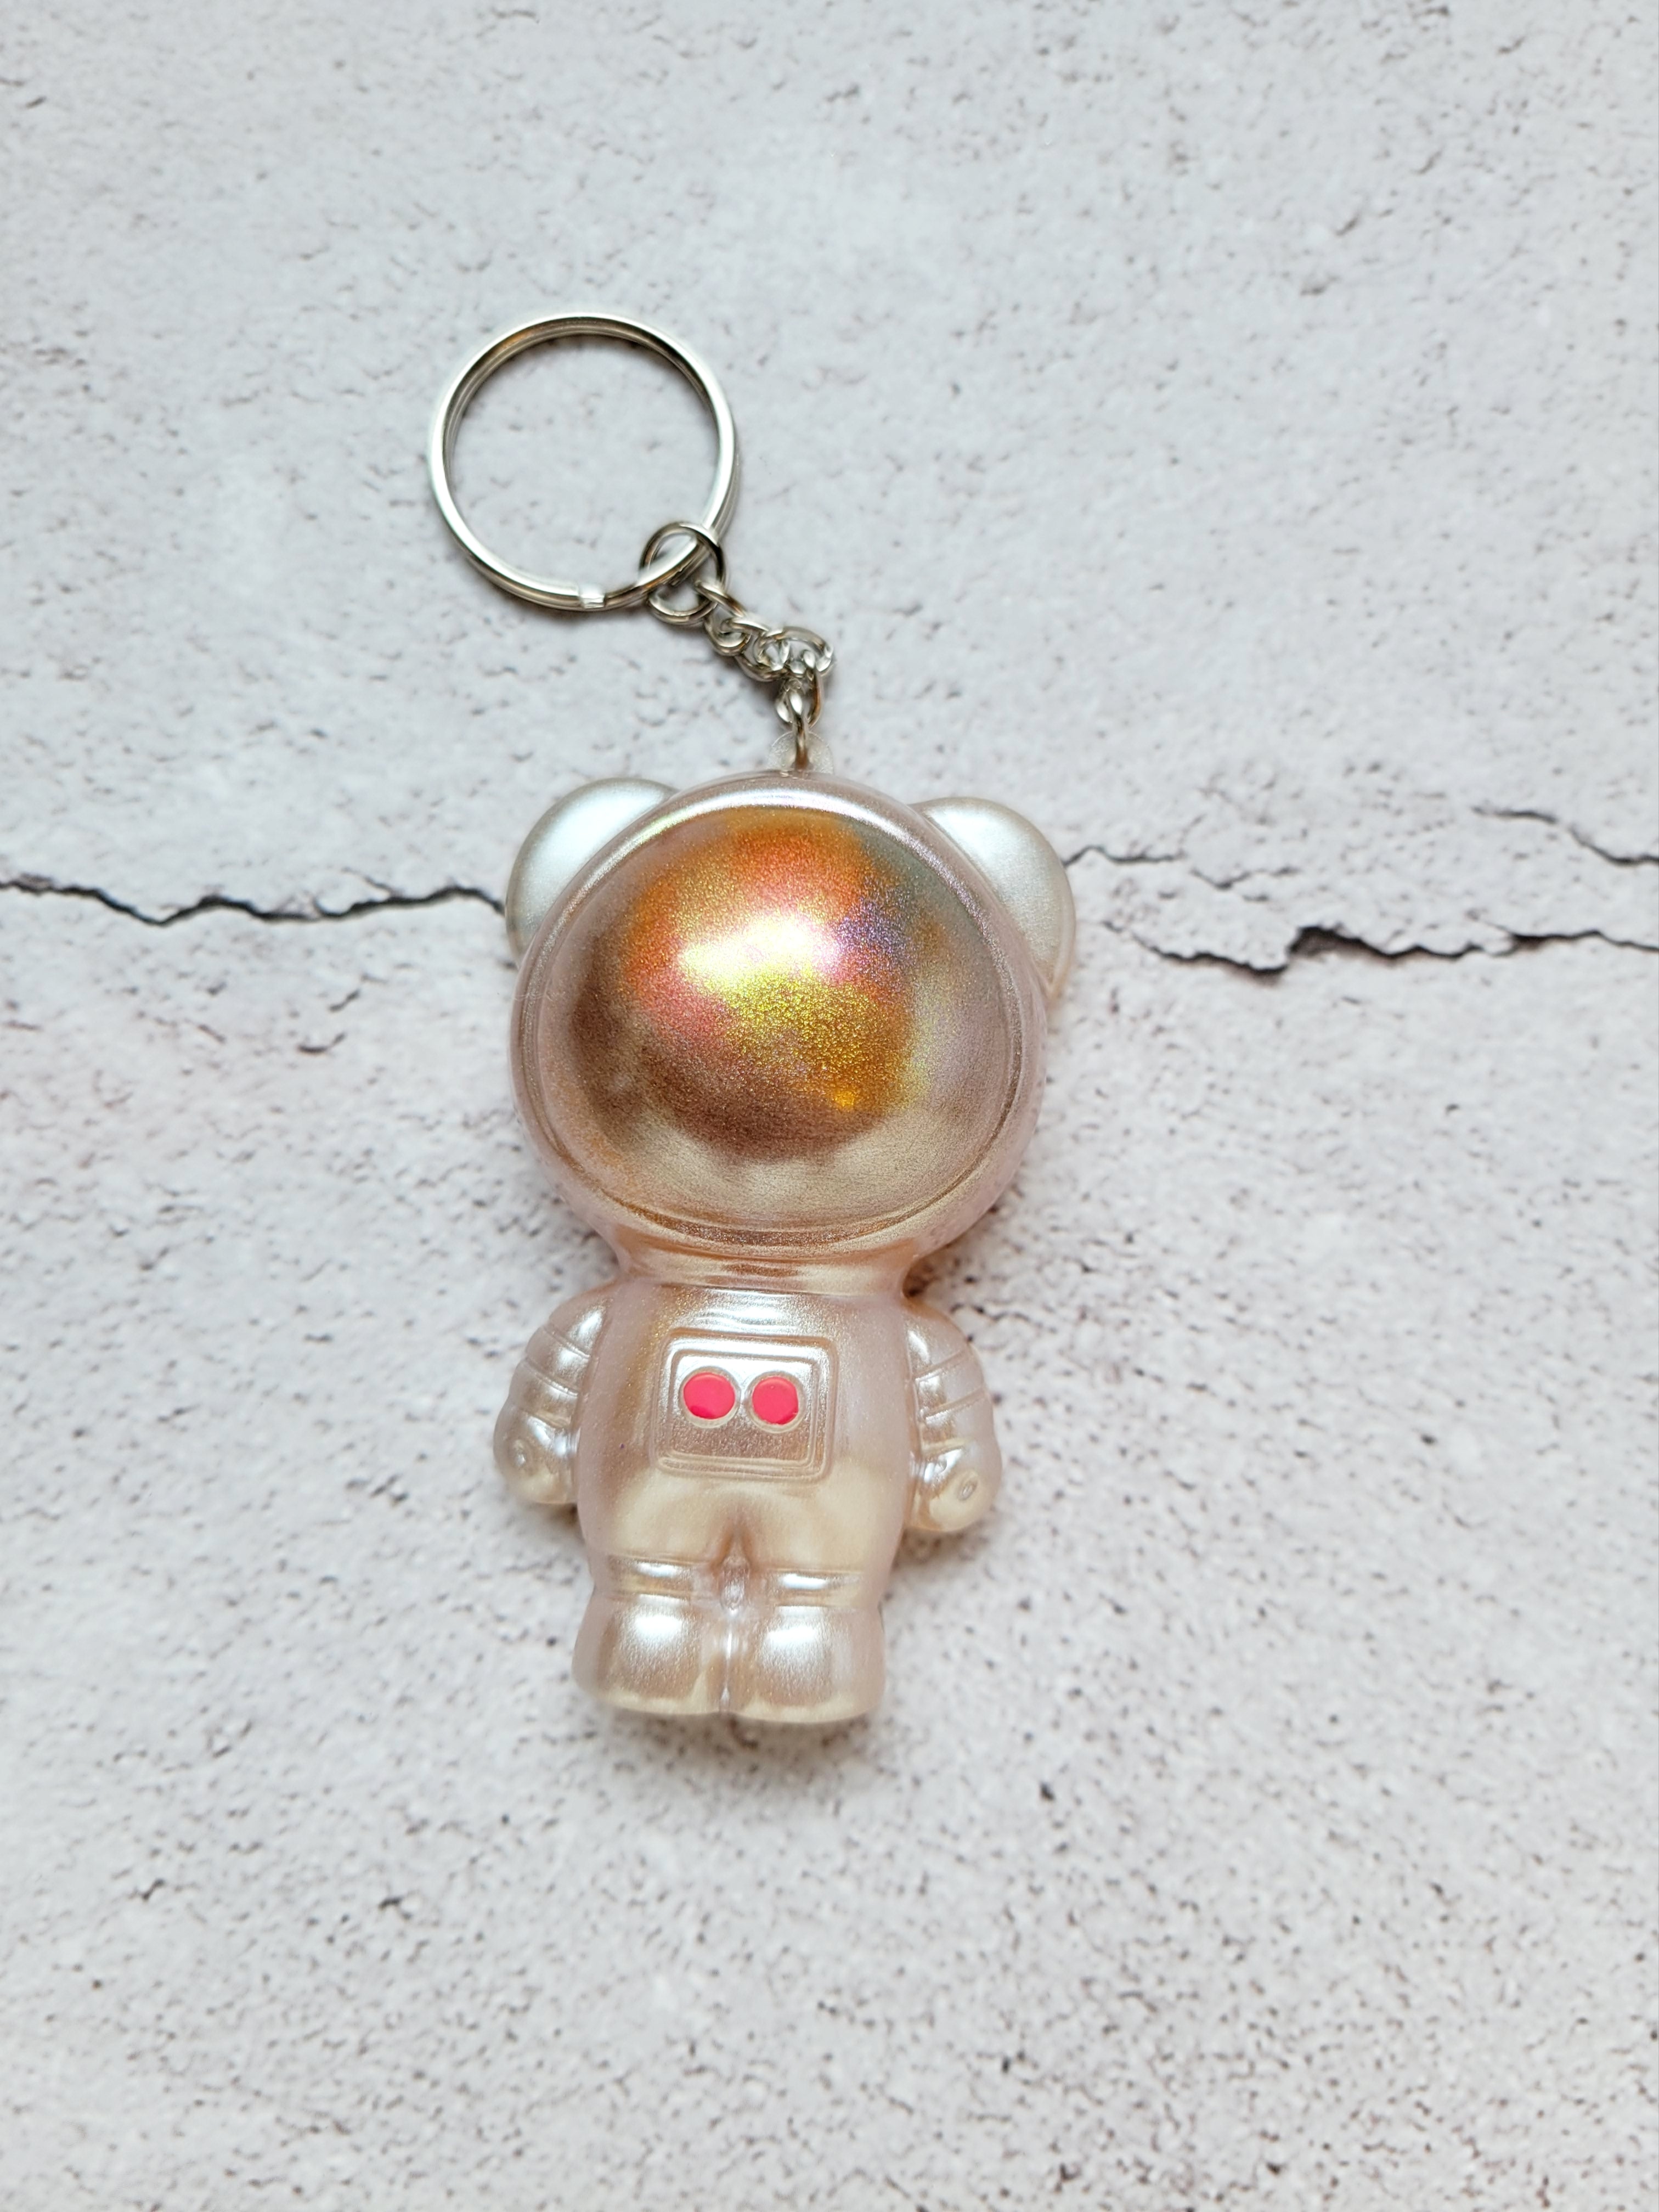 Astronaut bear in pearl space suit with two red buttons. the helmet has color shifting colors to look like a reflected nebula. It has a silver hoop and chain. Top view